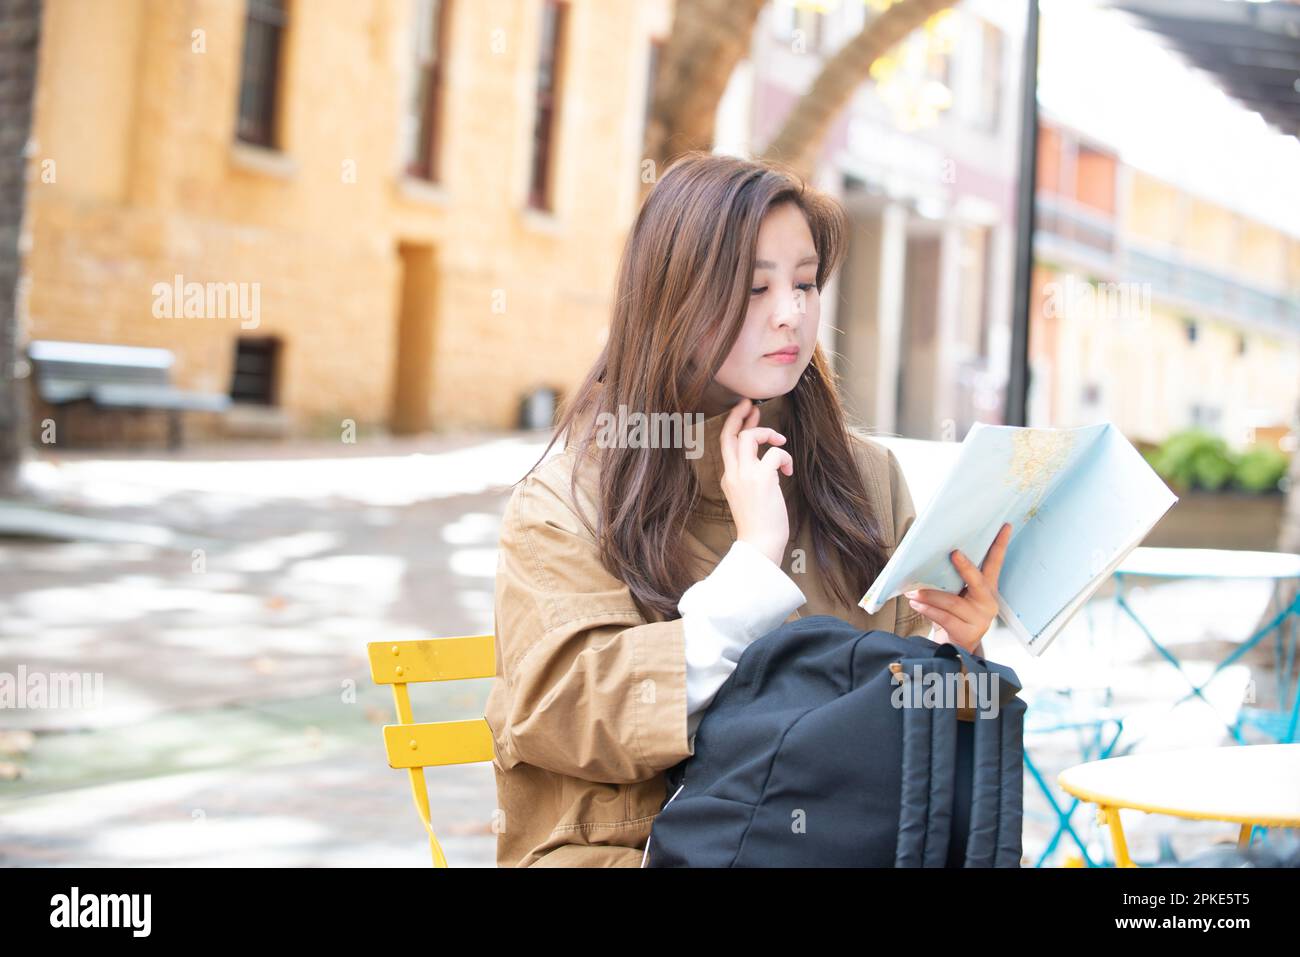 Woman sitting and looking at a map Stock Photo